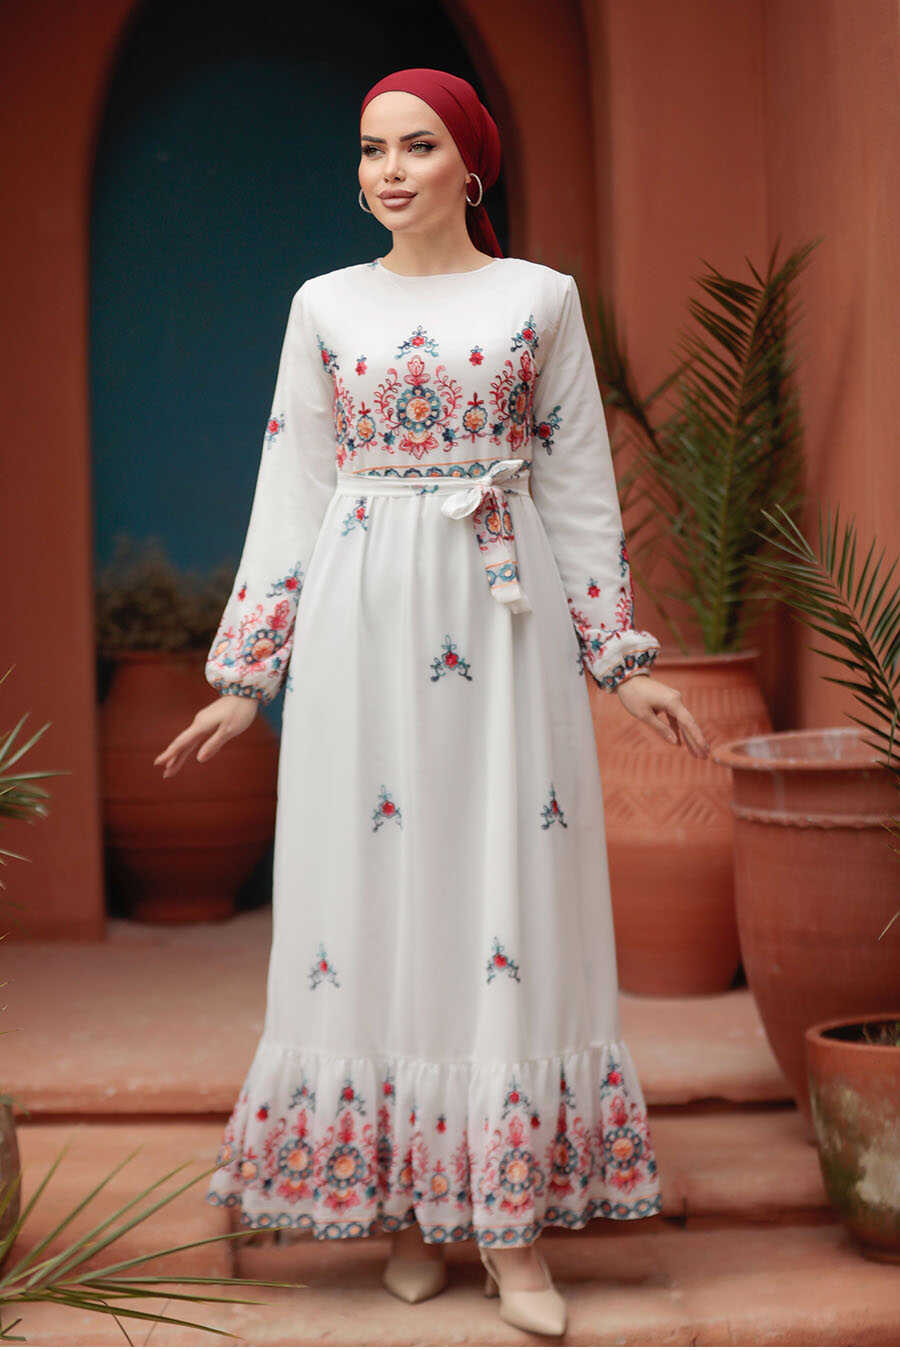 Dado Style Casual Turkish Dress For Women: Buy Online at Best